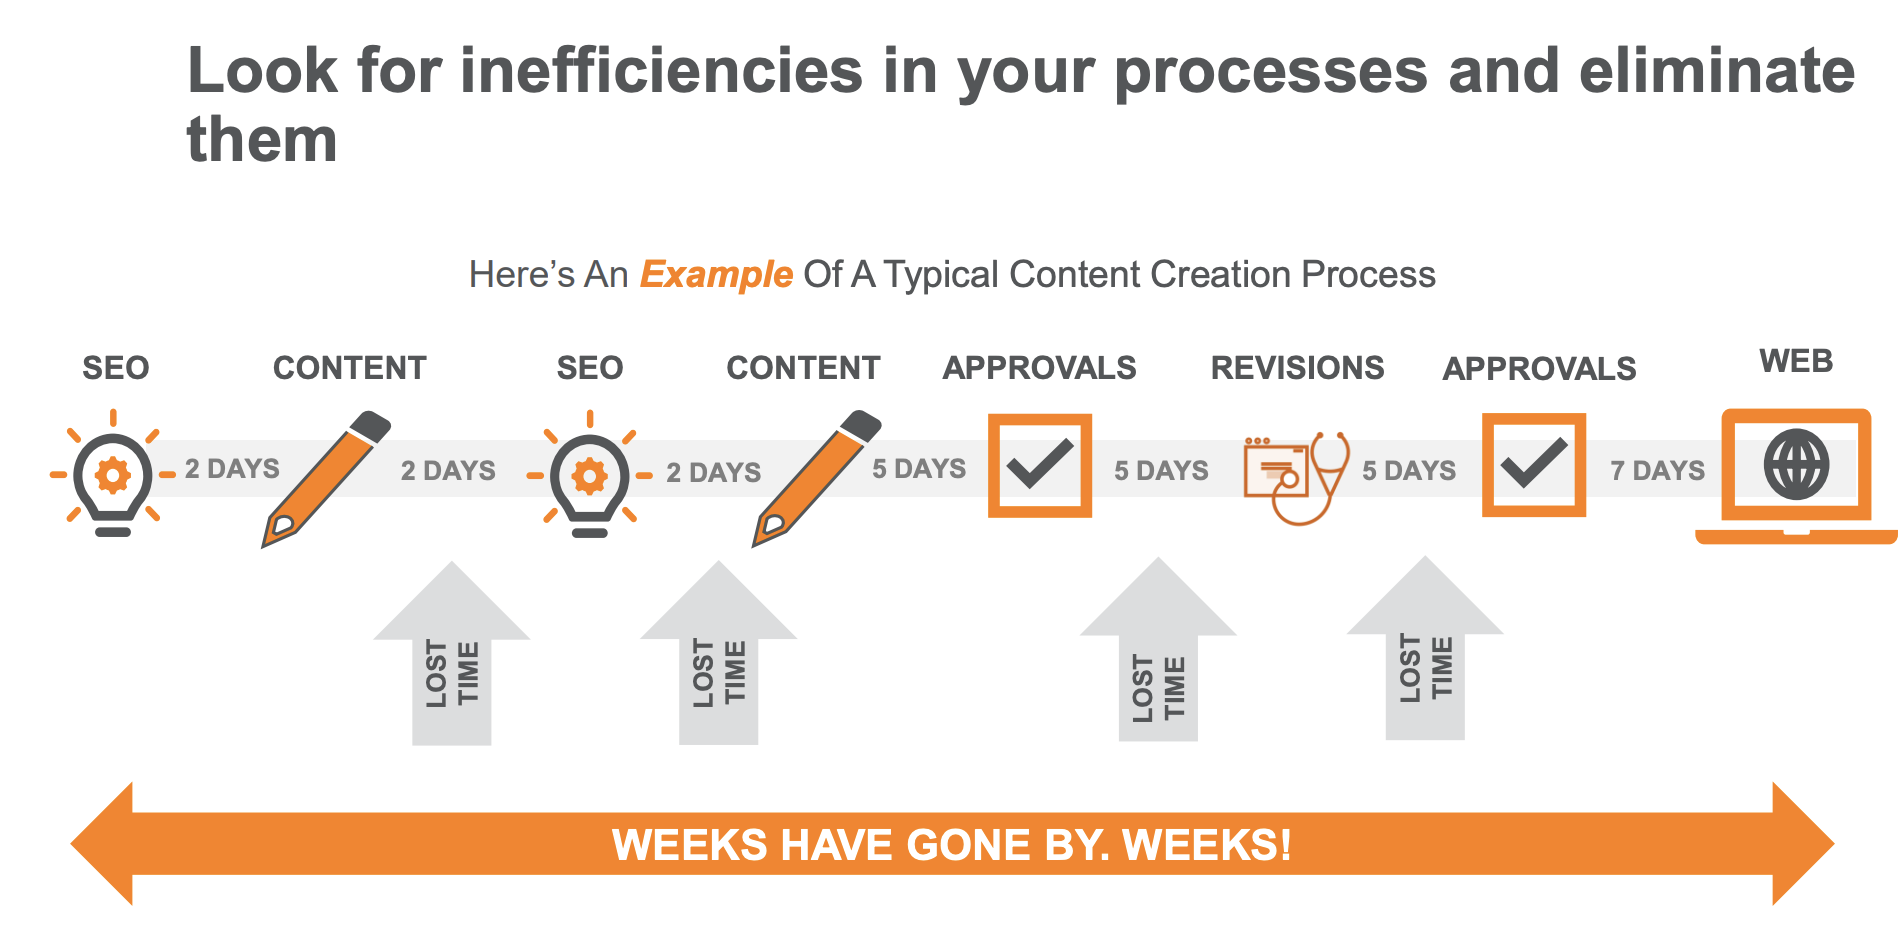 Level Up Your Content Strategy – 5 Steps To SEO Success